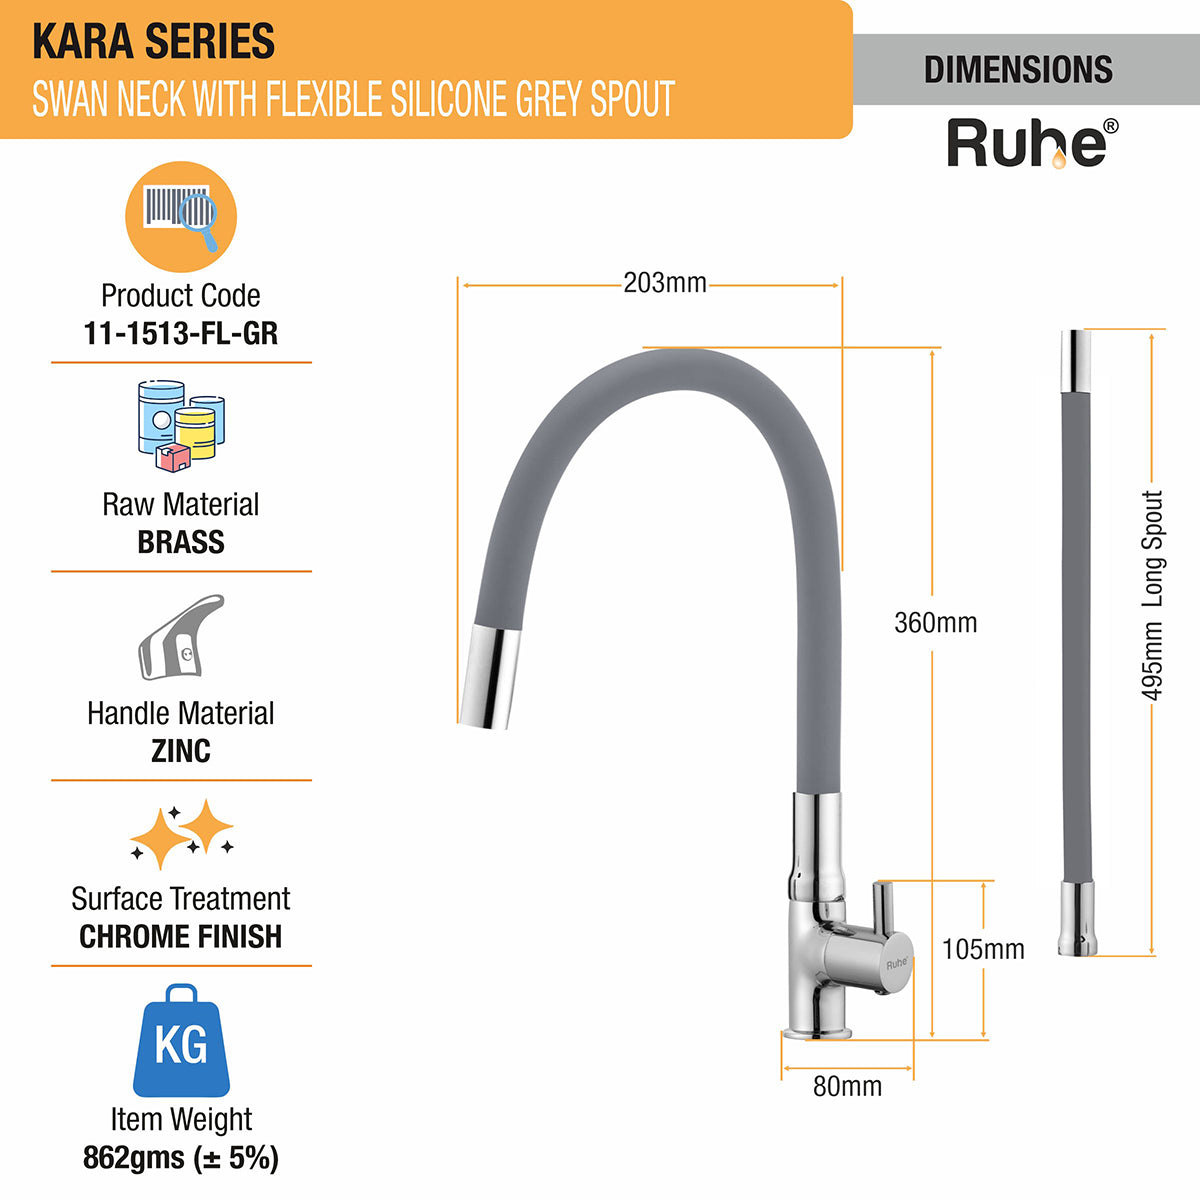 Kara Swan Neck Brass Faucet with Silicon Grey Flexible Spout dimensions and sizes